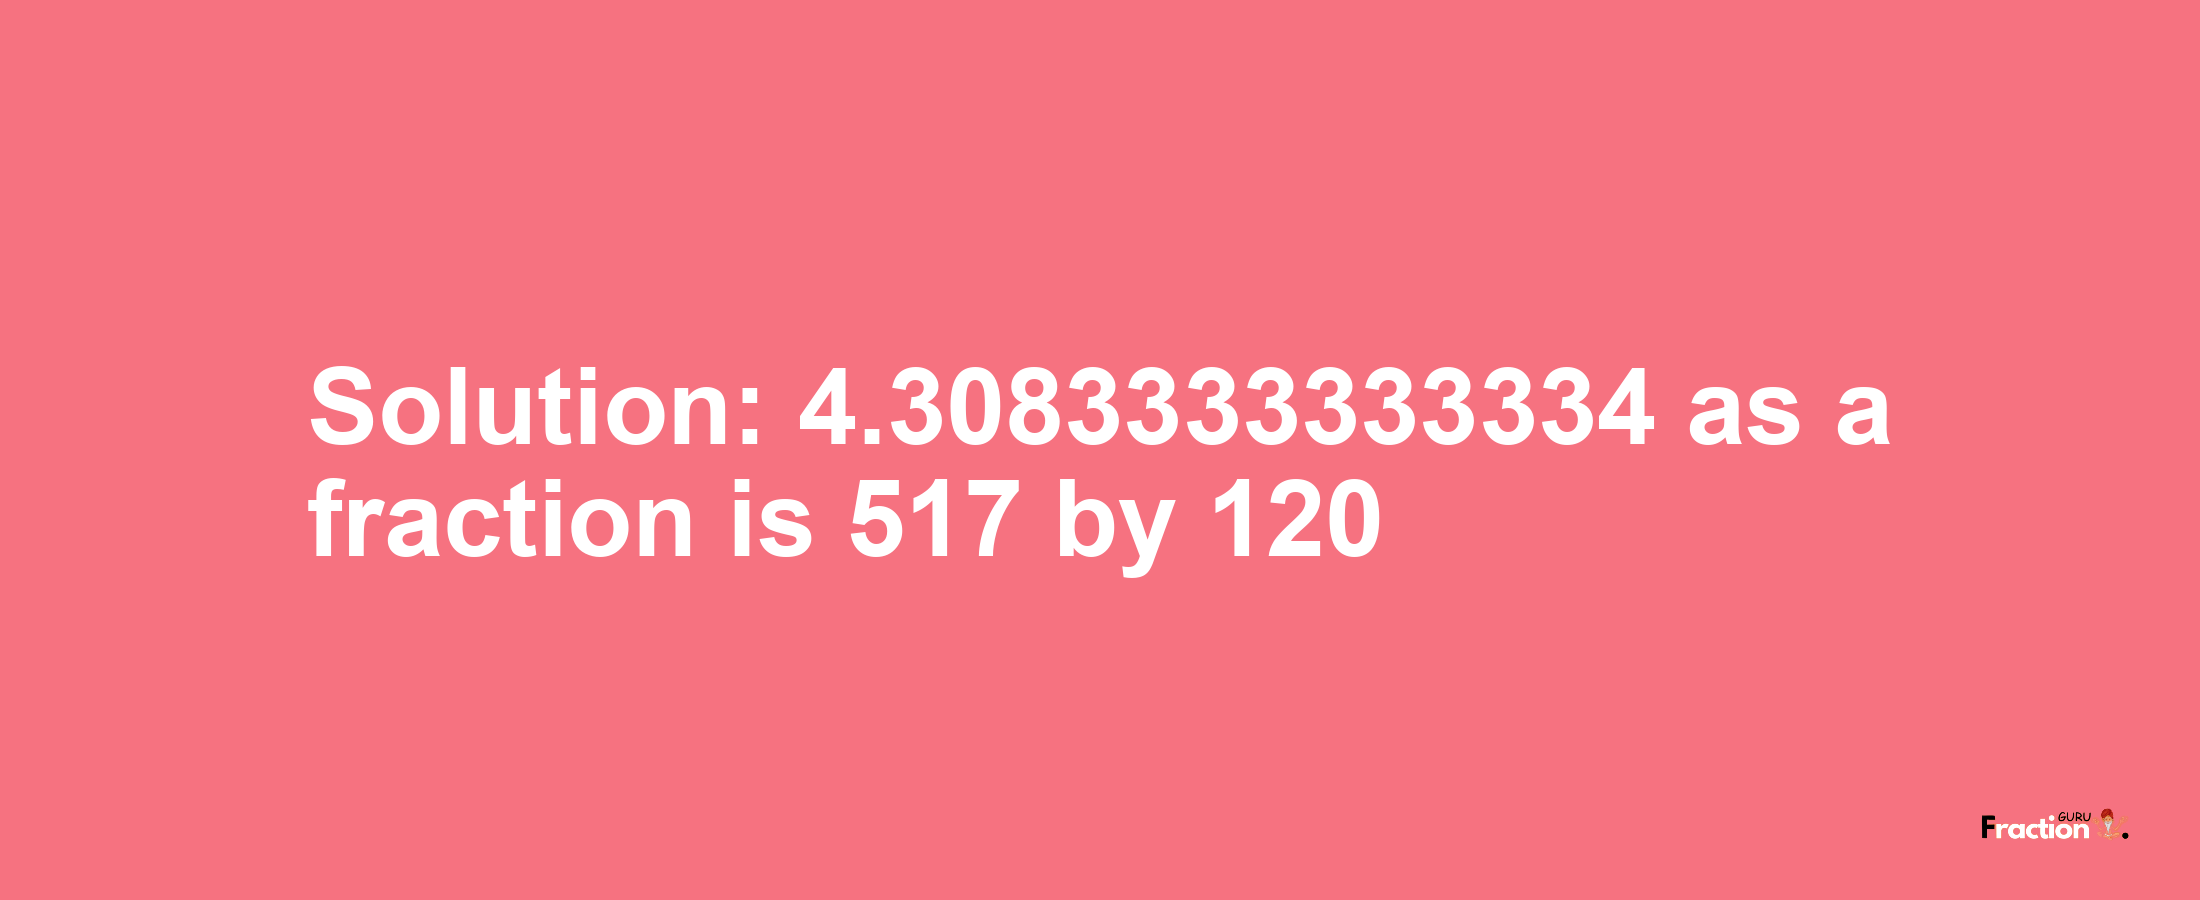 Solution:4.3083333333334 as a fraction is 517/120